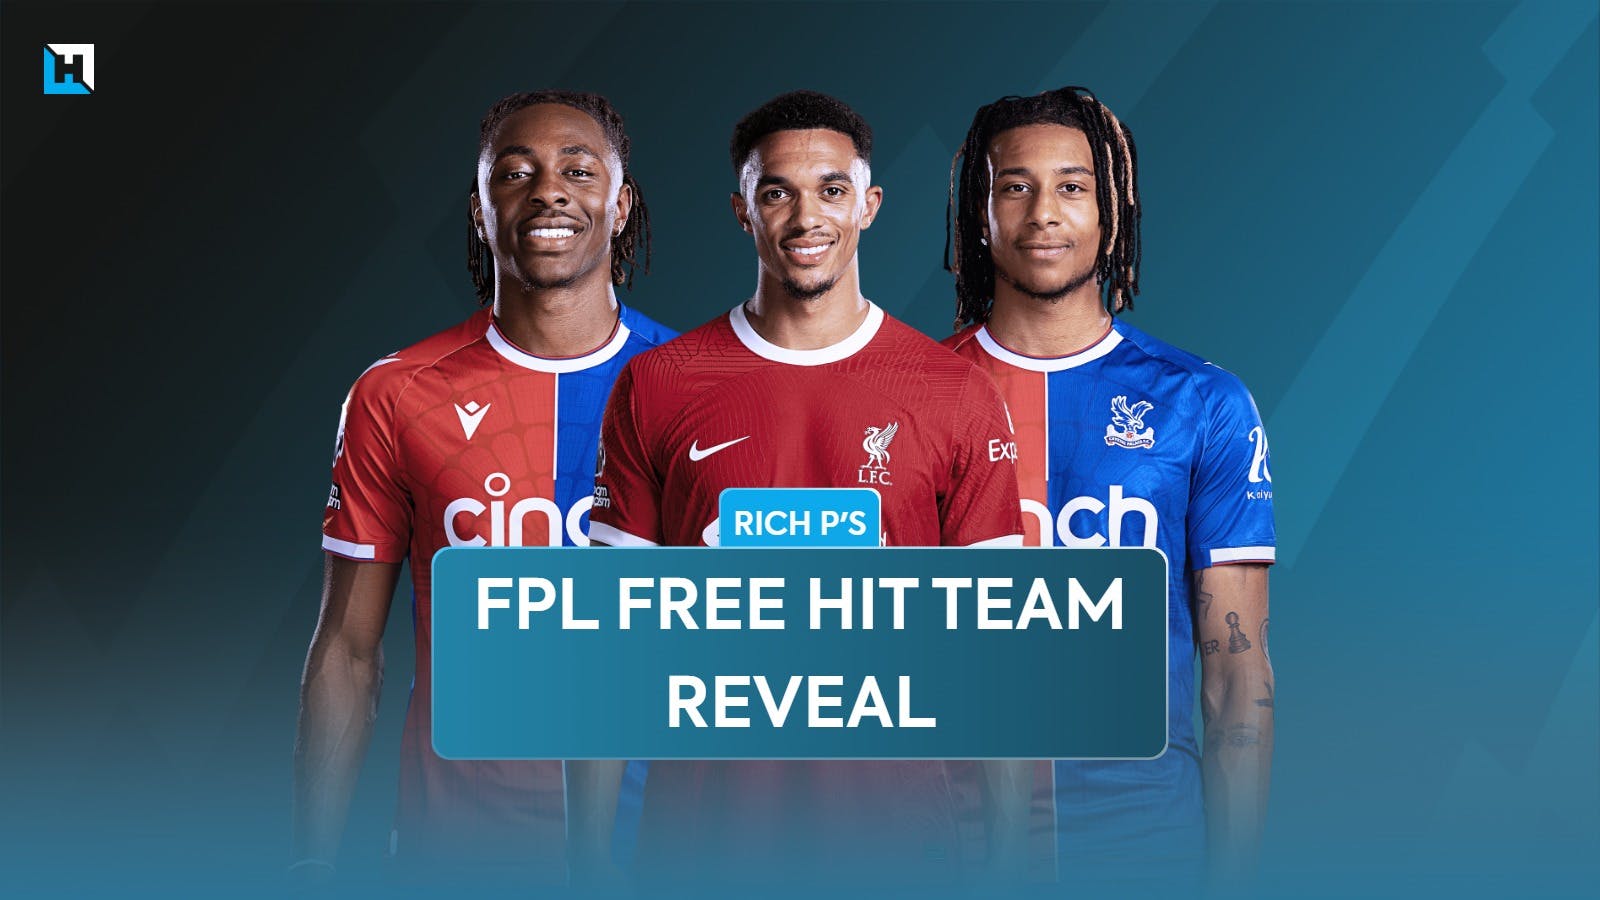 Using FPL Points as a Metric Double Gameweek 34 | Rich P’s team reveal